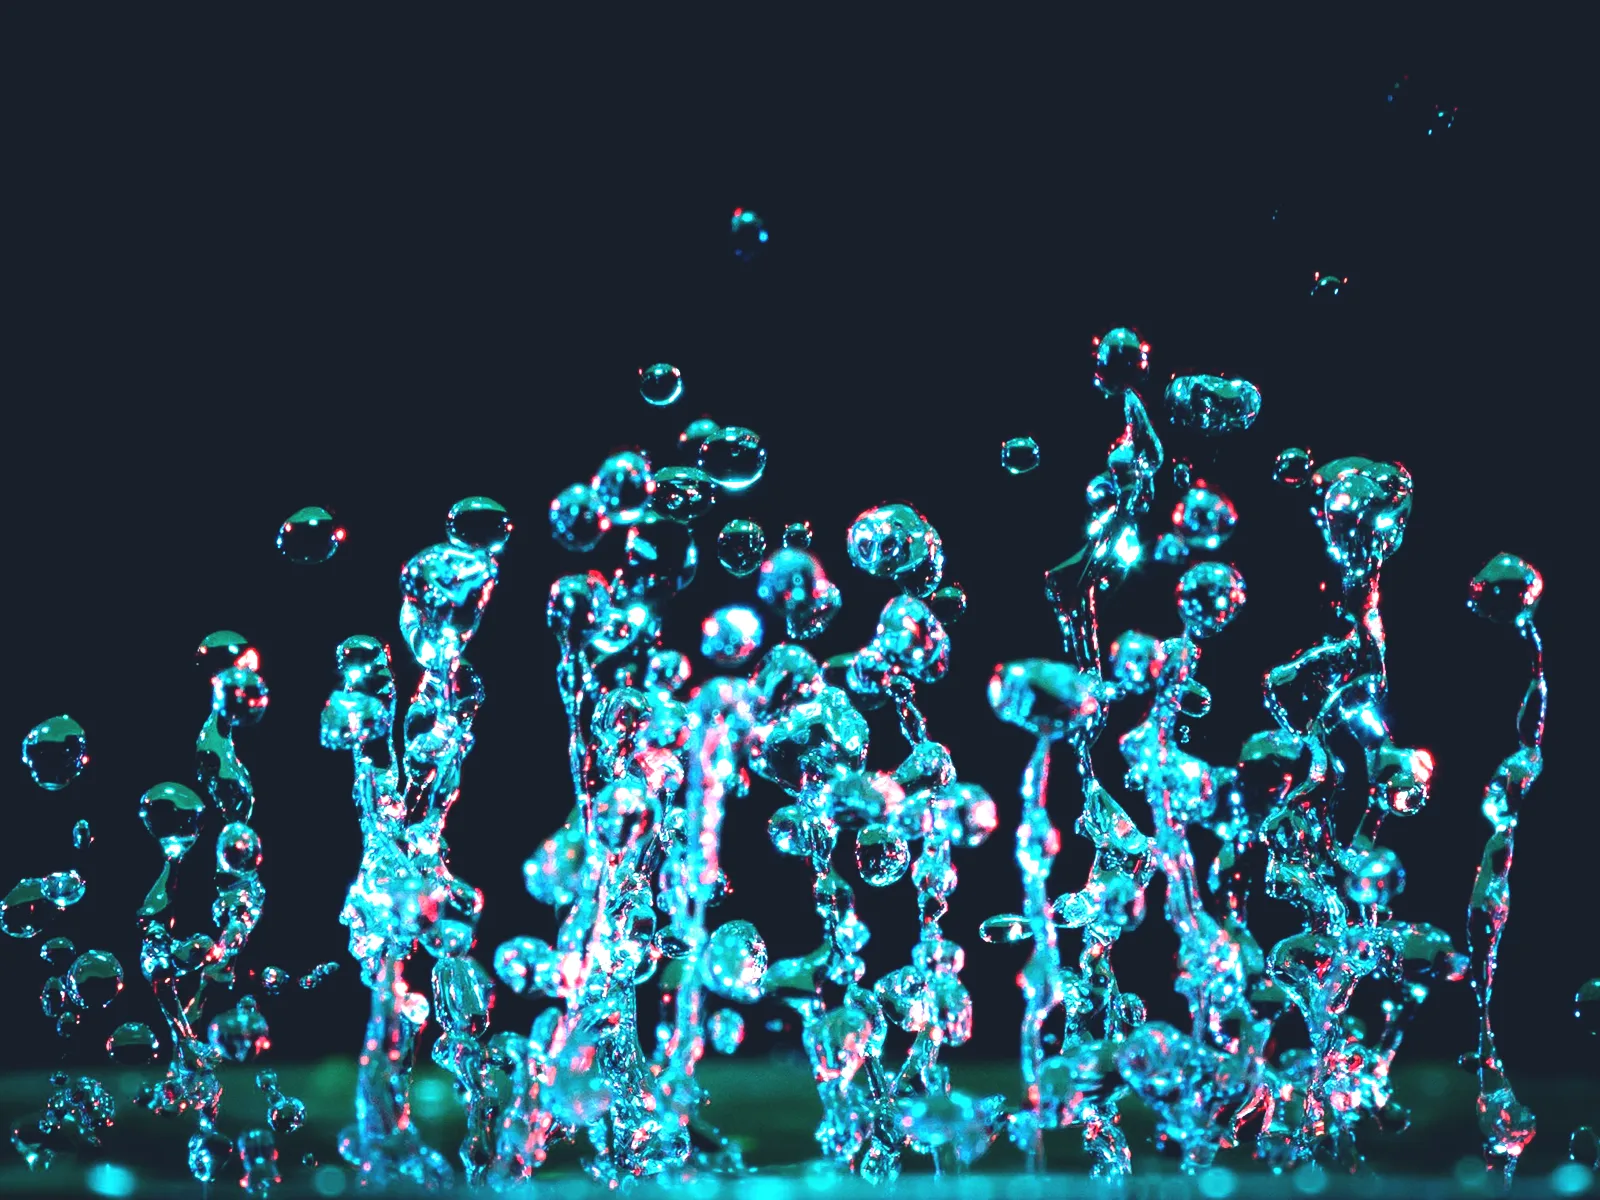 water bubbles on a dark background